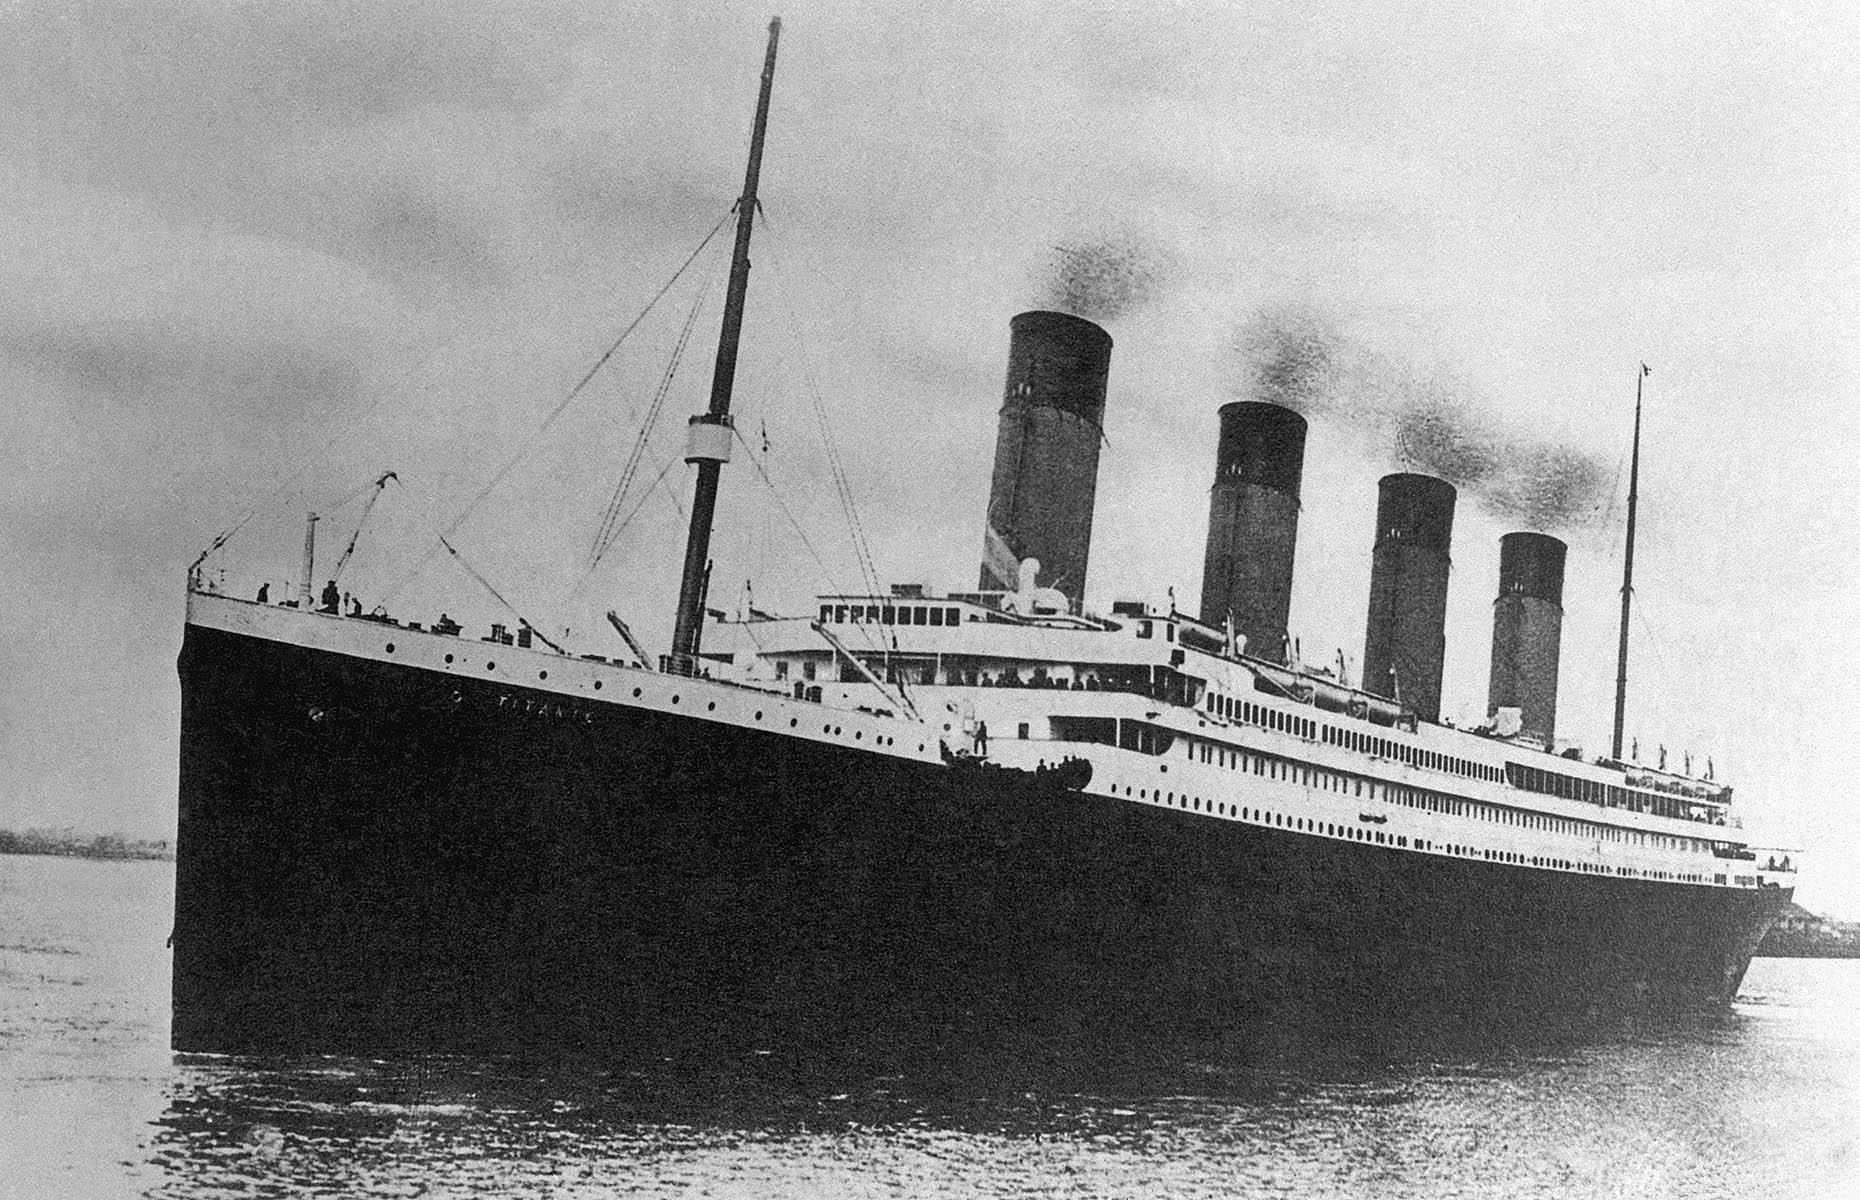 <p>Arguably the most famous shipwreck of all time, the ill-fated Titanic collided with an iceberg in the late hours of April 14, 1912. The disaster claimed the lives of some 1,500 of its 2,240 passengers.</p>  <p>Over the years, treasures telling the story of those passengers <span>–</span> both those who survived and those who tragically lost their lives <span>– </span>have been recovered. <strong>Read on to discover some of the most spectacular and valuable pieces from the tragic ship, including a menu that's just fetched a staggering sum.</strong></p>  <p>All dollar values in US dollars and currency conversions correct at the time of sale.</p>